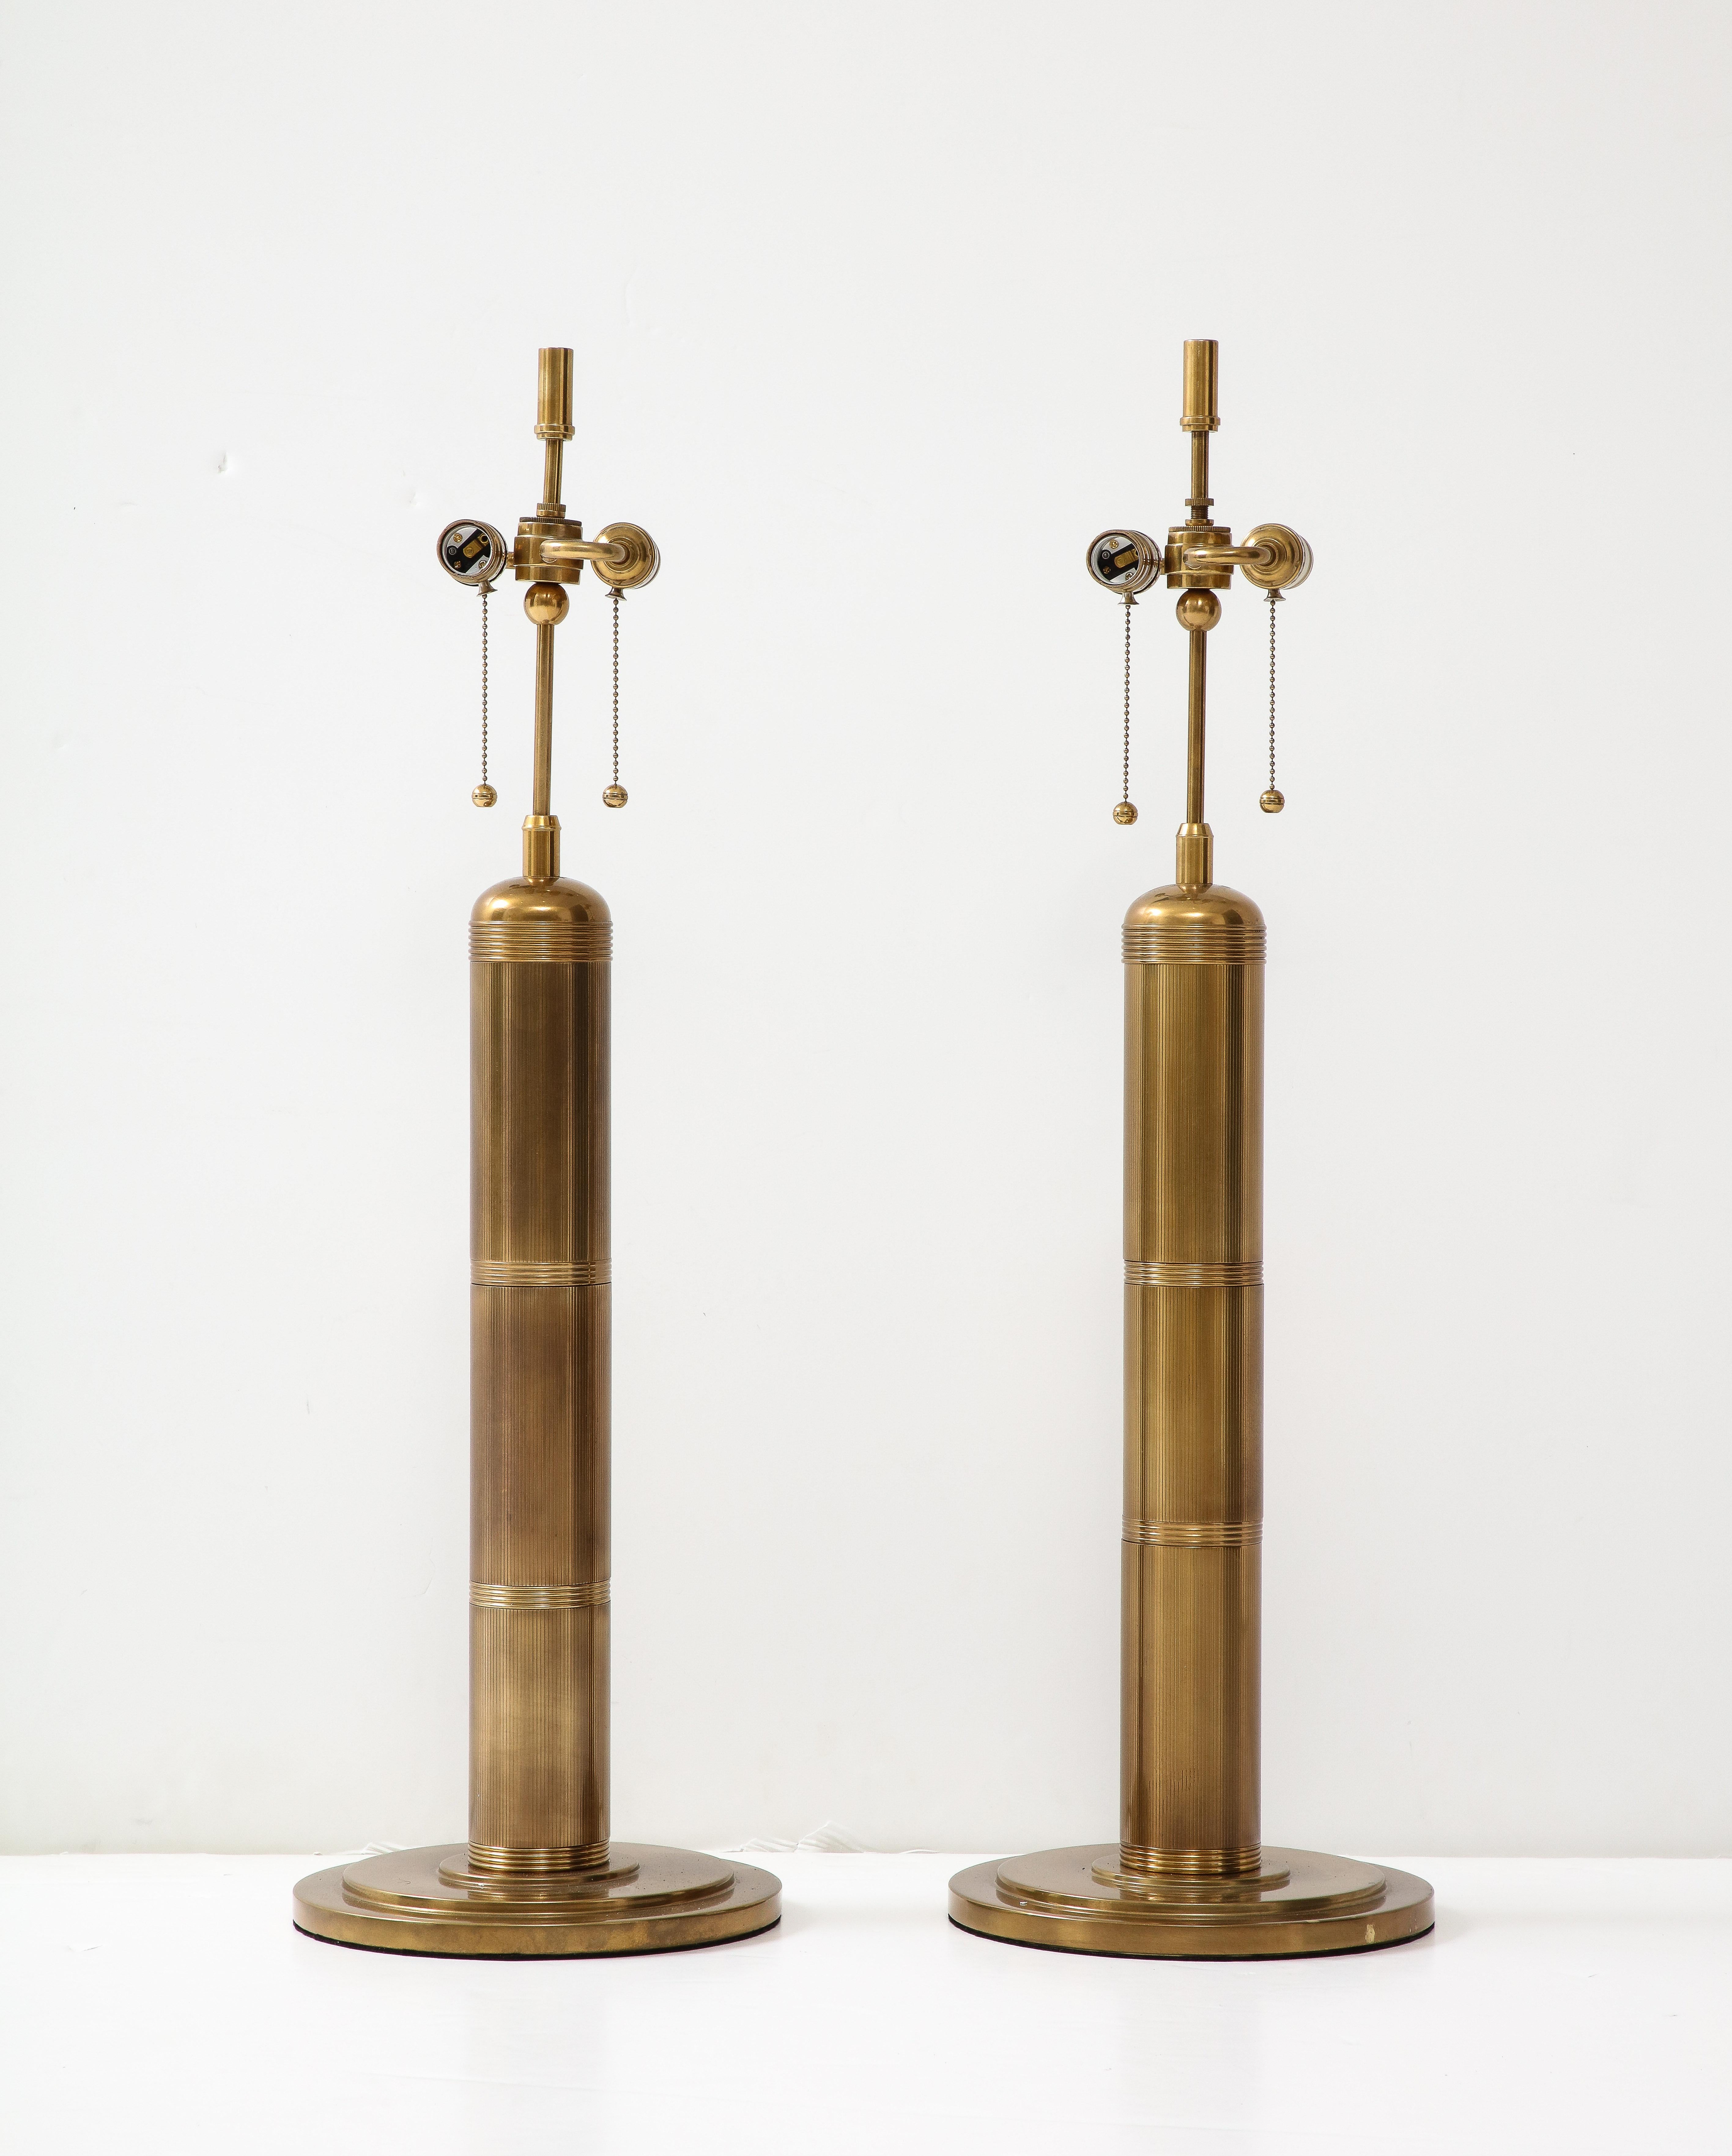 Modernist pair of bronze lamps with machine engraved column bodies and stepped disc bases. Lamps feature double pull chain sockets. Rewired for use in the USA with brown fabric cords by an UL listed electrician. 75W bulb max each bulb, unless LED.